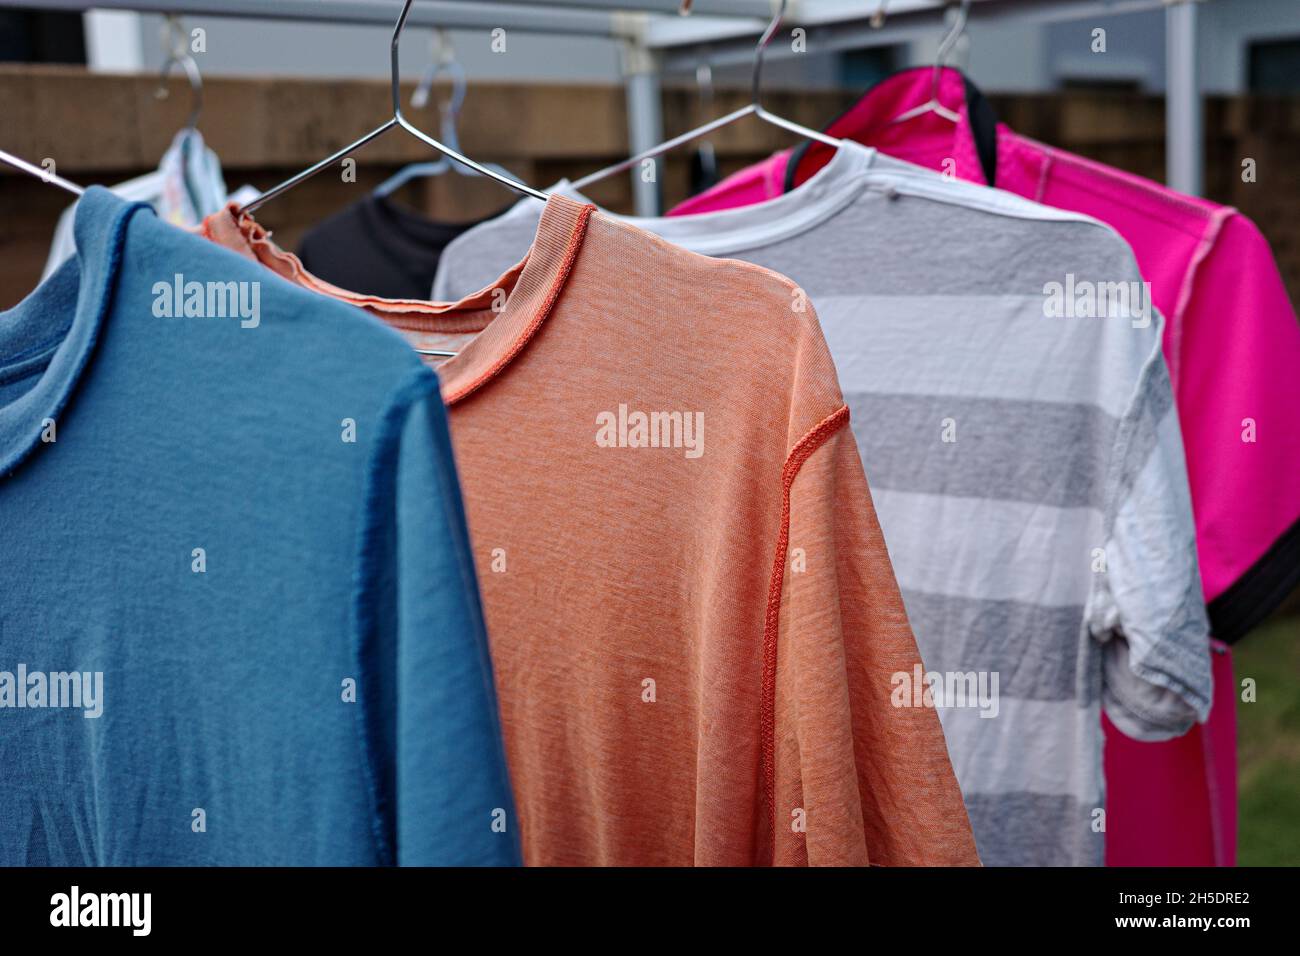 Old T-shirt in different color hanging on hanger at clothes line in outdoor with overcast sky. Stock Photo